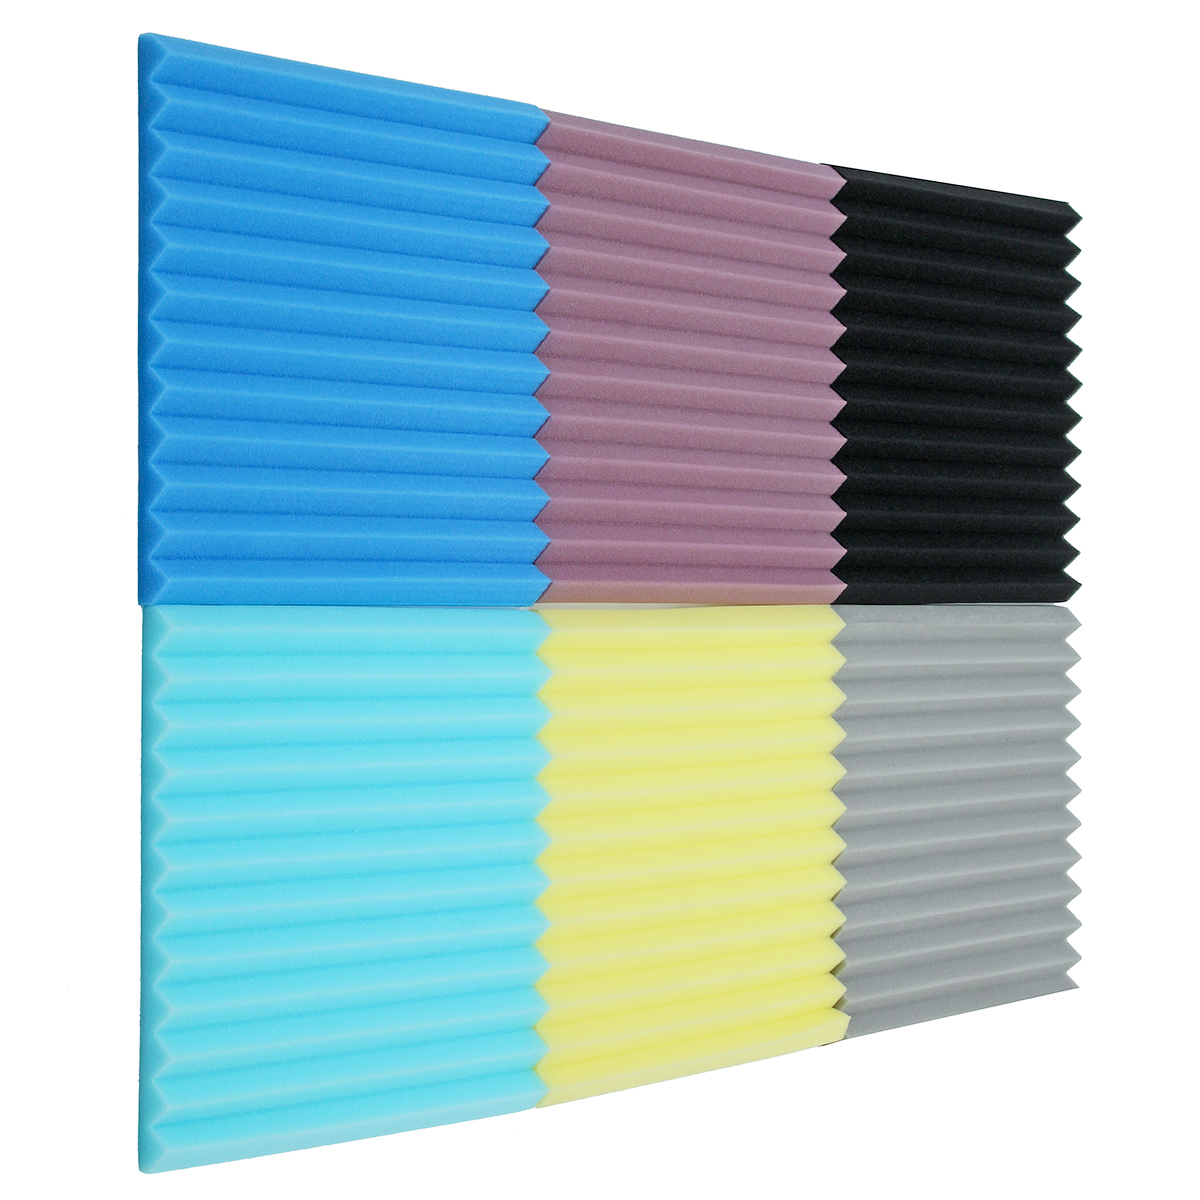 16-Pcs-Soundproofing-Wedges-Acoustic-Panels-Tiles-Insulation-Closed-Cell-Foams-1737781-8